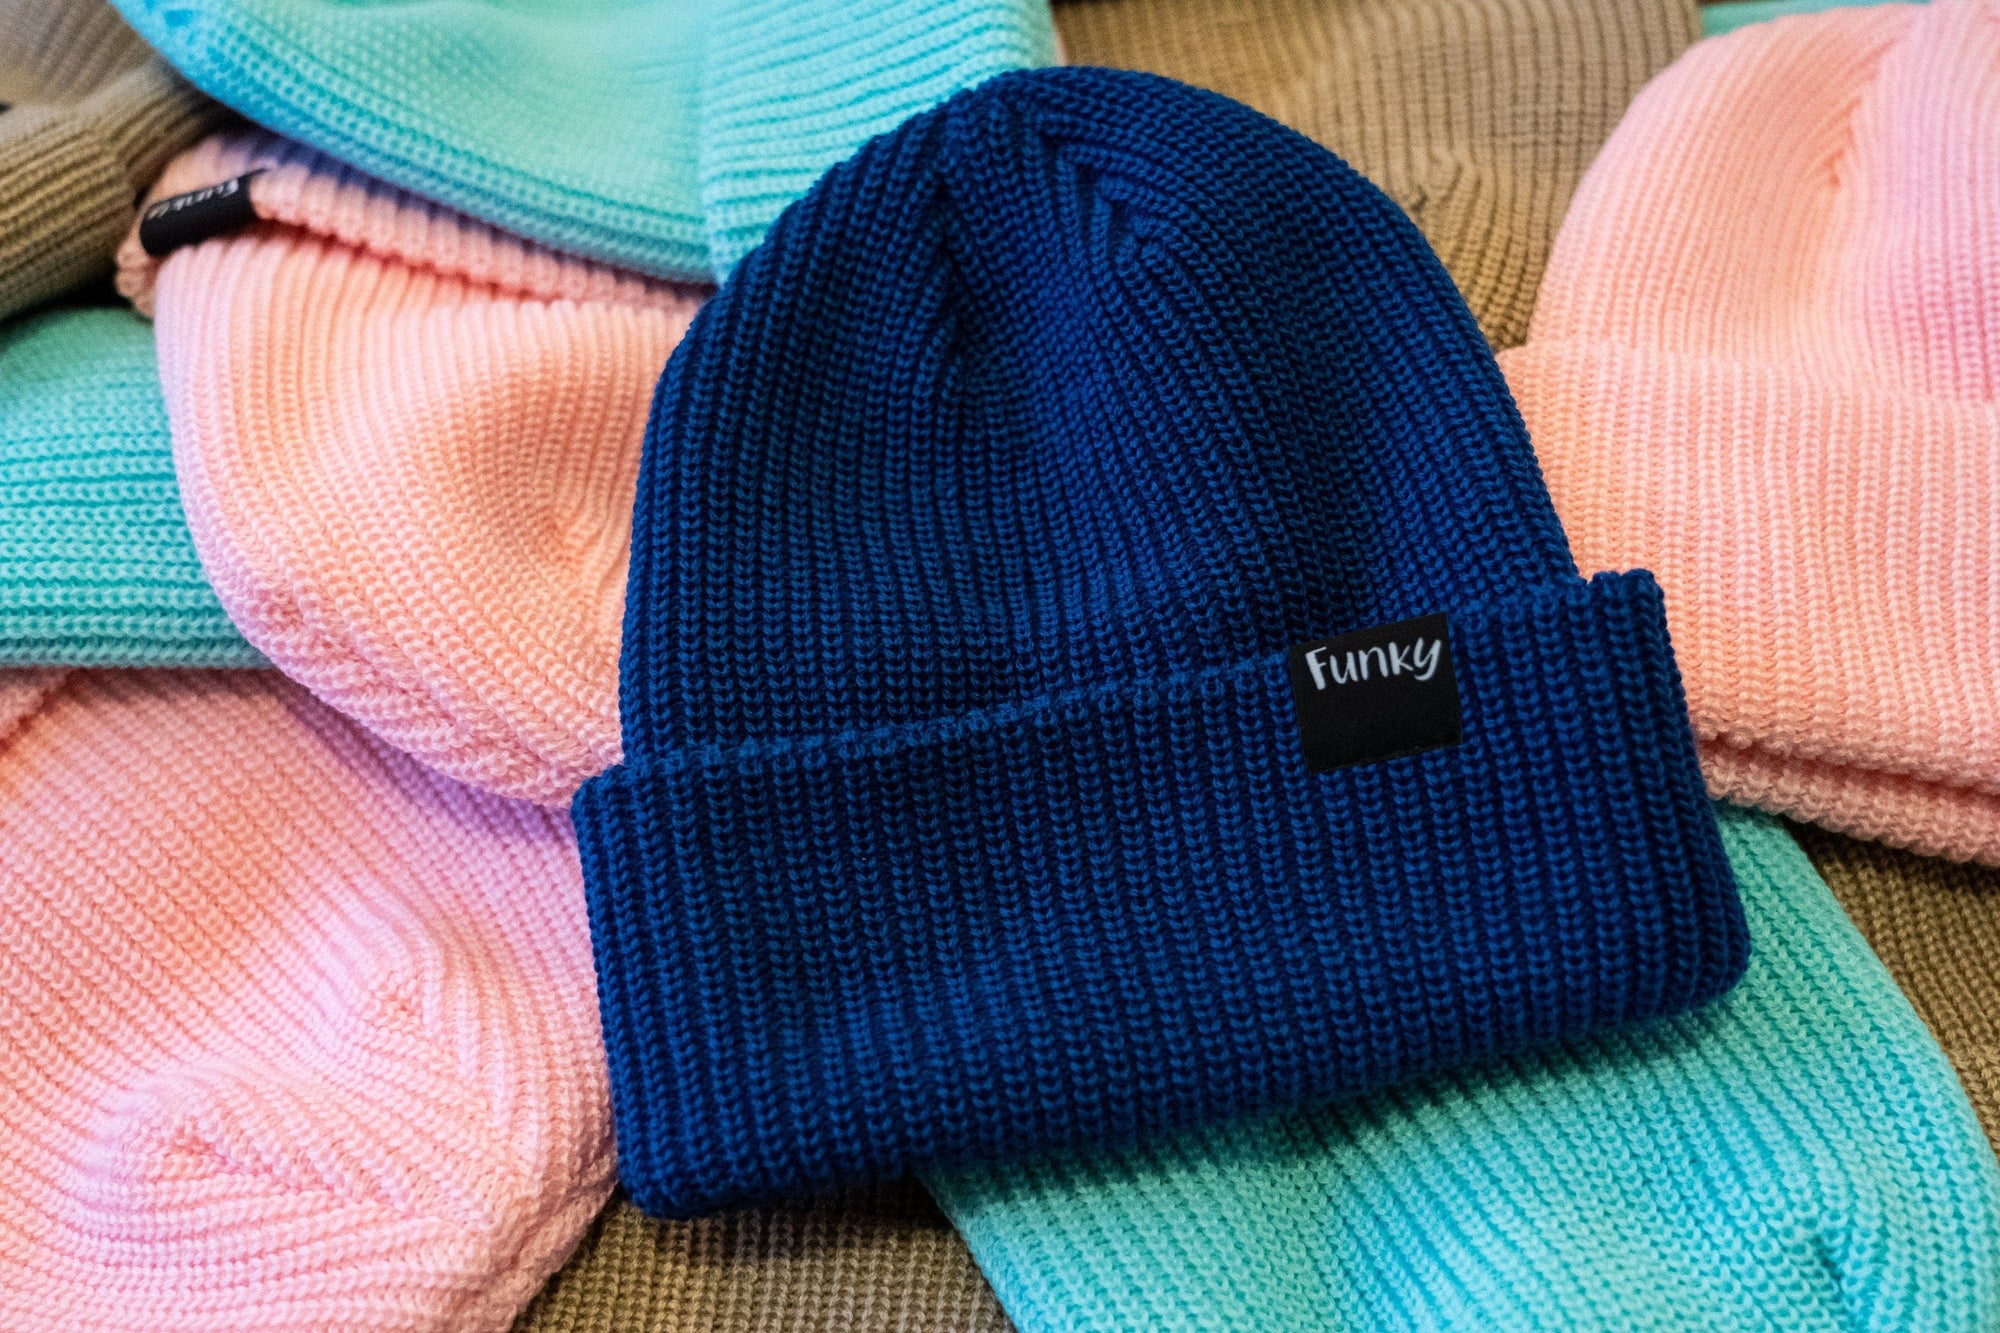 Tuque fluffy - Funky - Funky & Co.